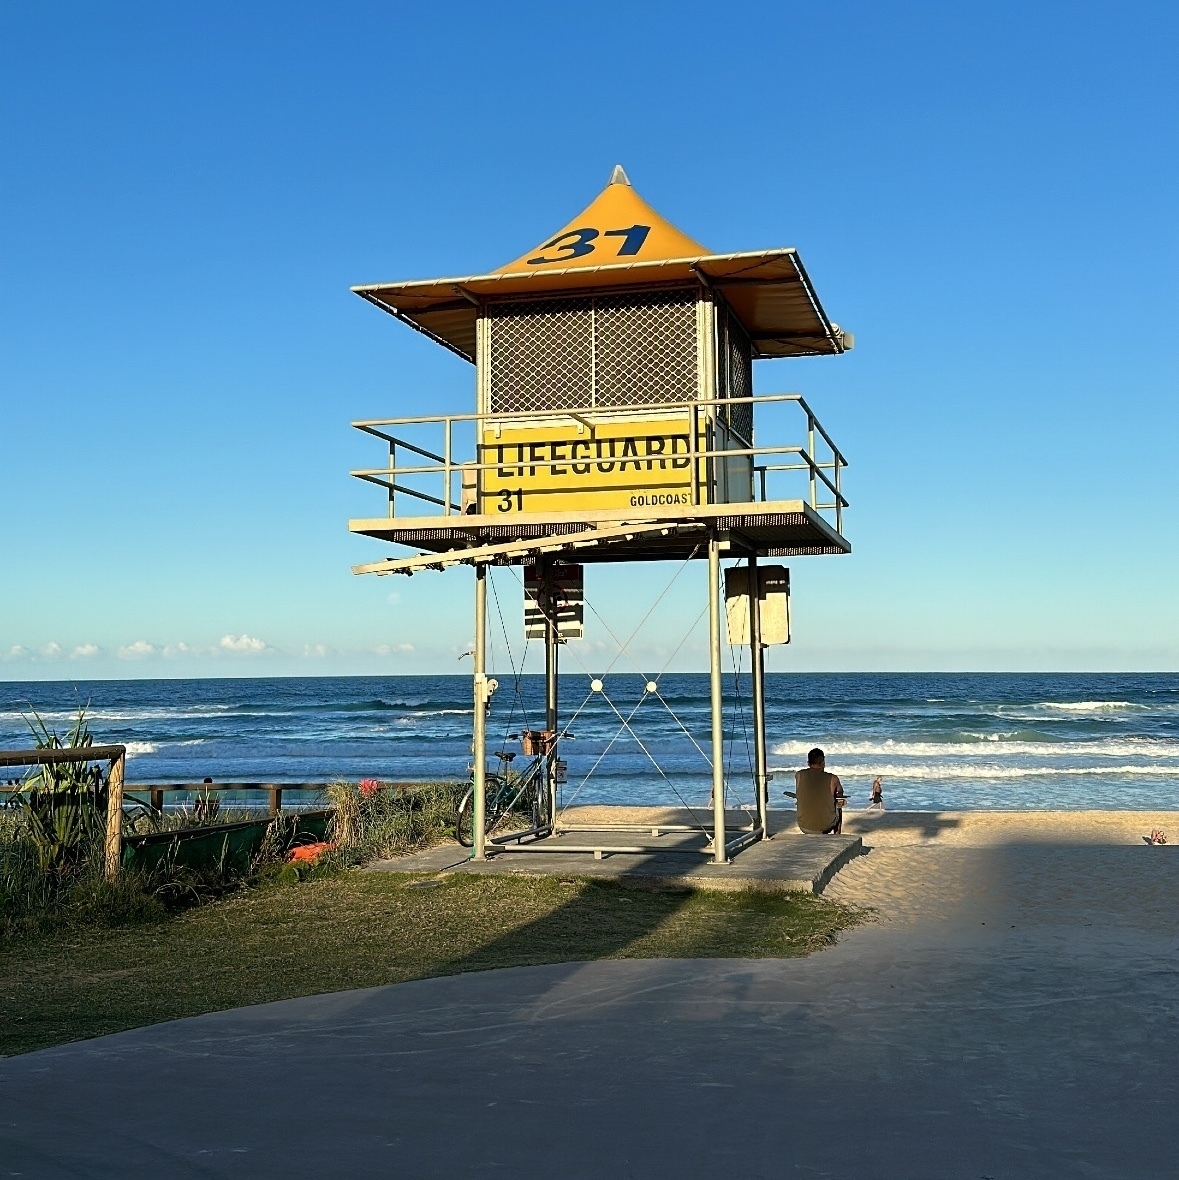 A yellow lifeguard tower with the beach beyond it. A large 31 is painted in blue on the roof of the tower and LIFEGUARD is painted blue on the side. 